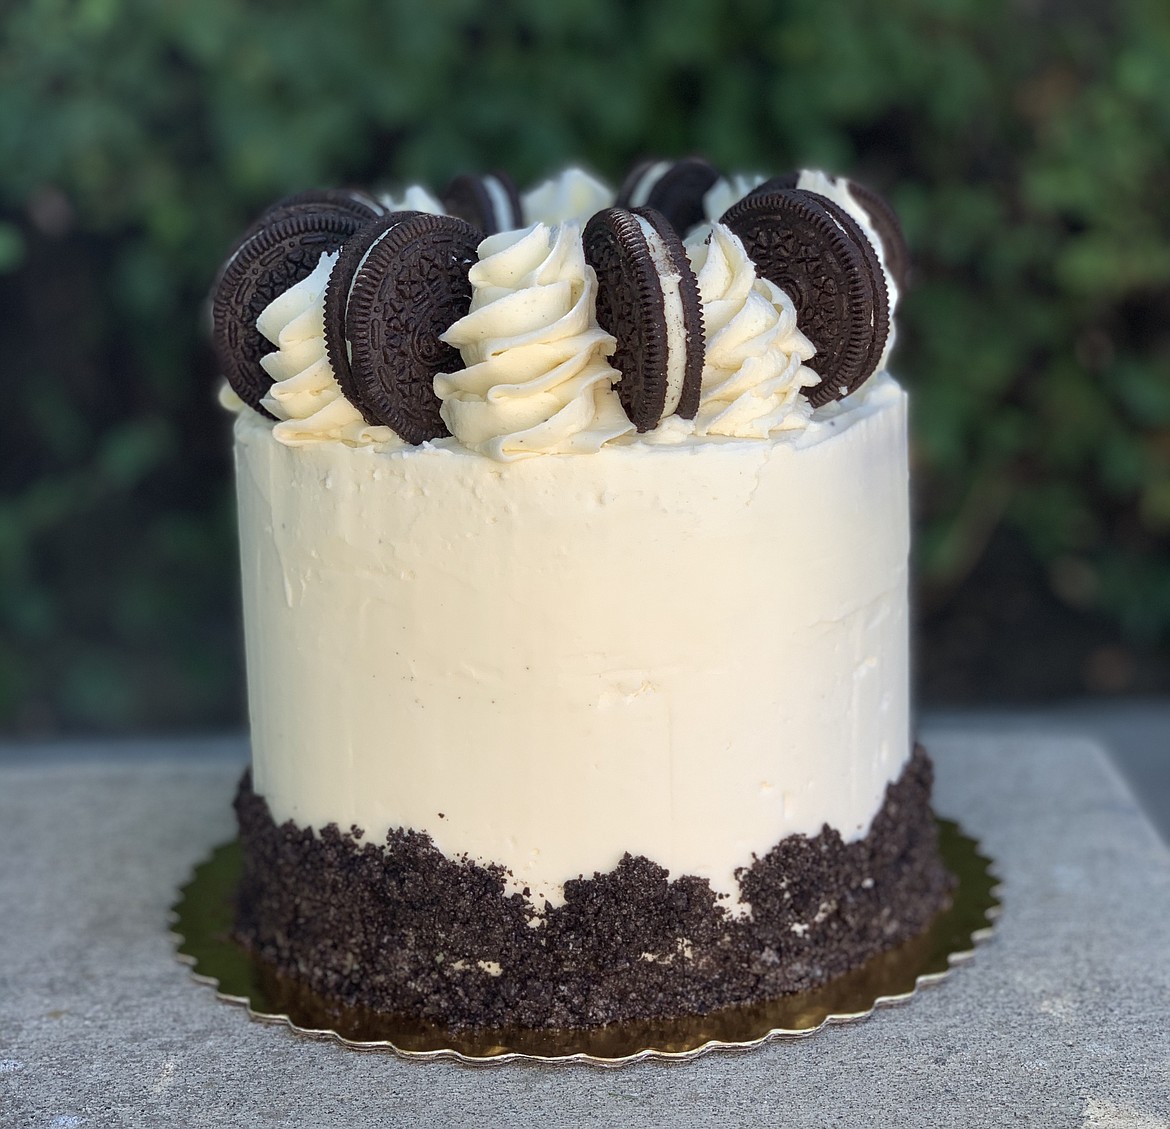 Oreo cake created by Paige Tolley of Paige's Custom Cakes. Tolley said it's one of her biggest sellers.